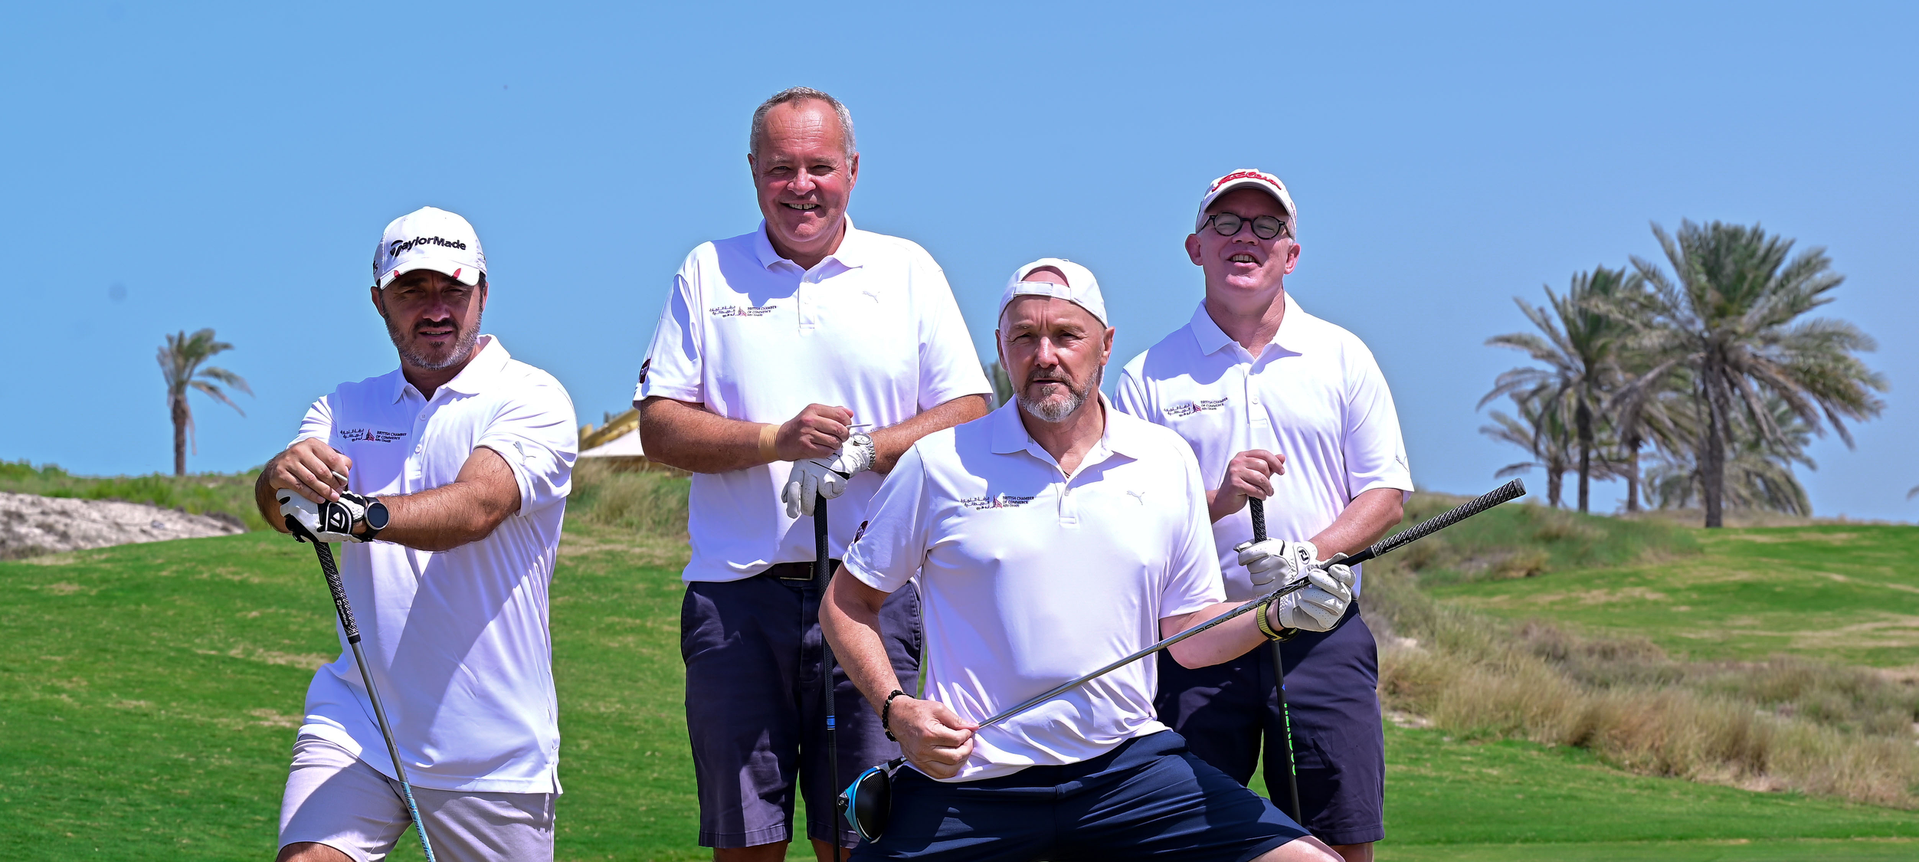 thumbnails BCC AD Corporate Golf Day